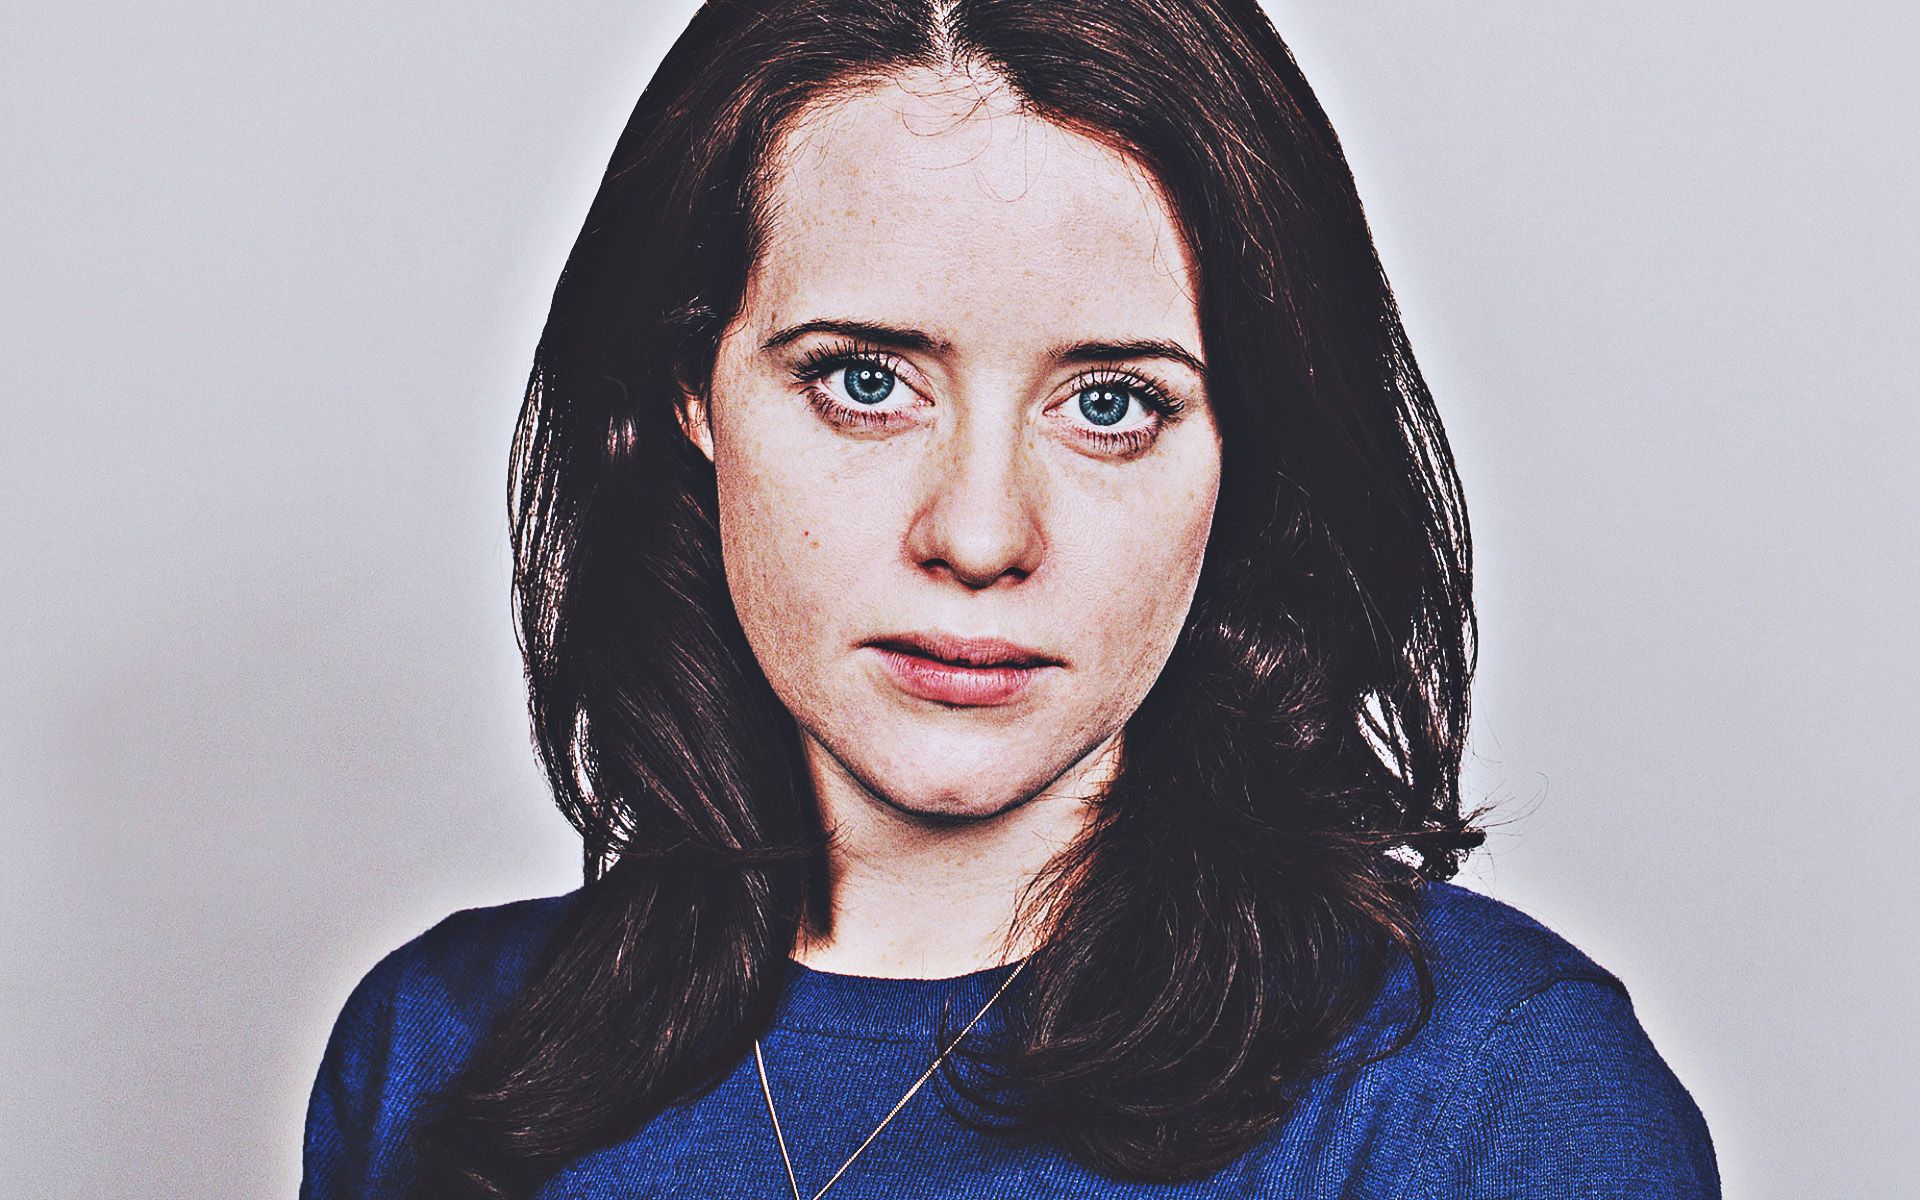 Download wallpaper Claire Foy, english actress, beauty, english celebrity, Claire Elizabeth Foy, brunette woman, Claire Foy photohoot for desktop with resolution 1920x1200. High Quality HD picture wallpaper